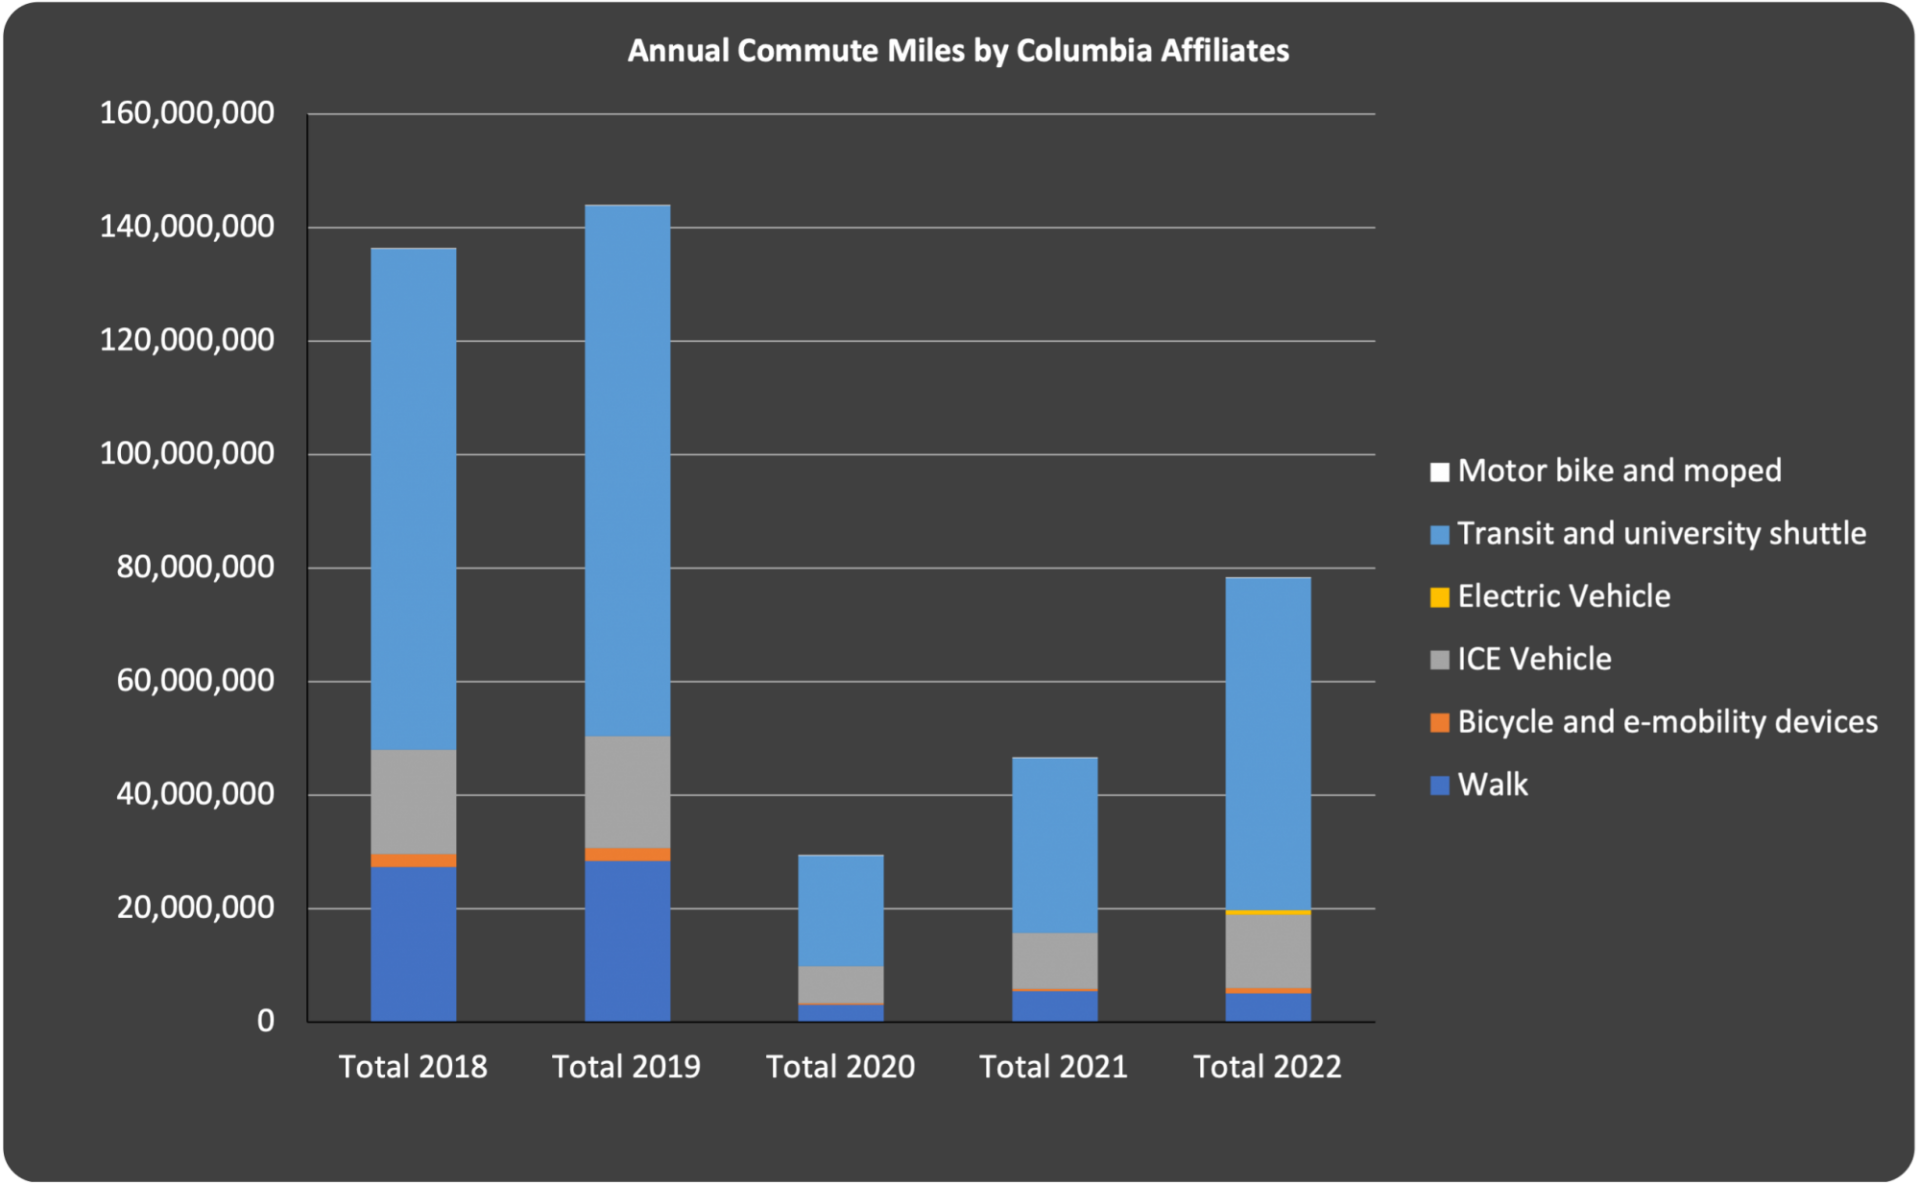 A chart showing annual commute miles by Columbia affiliates